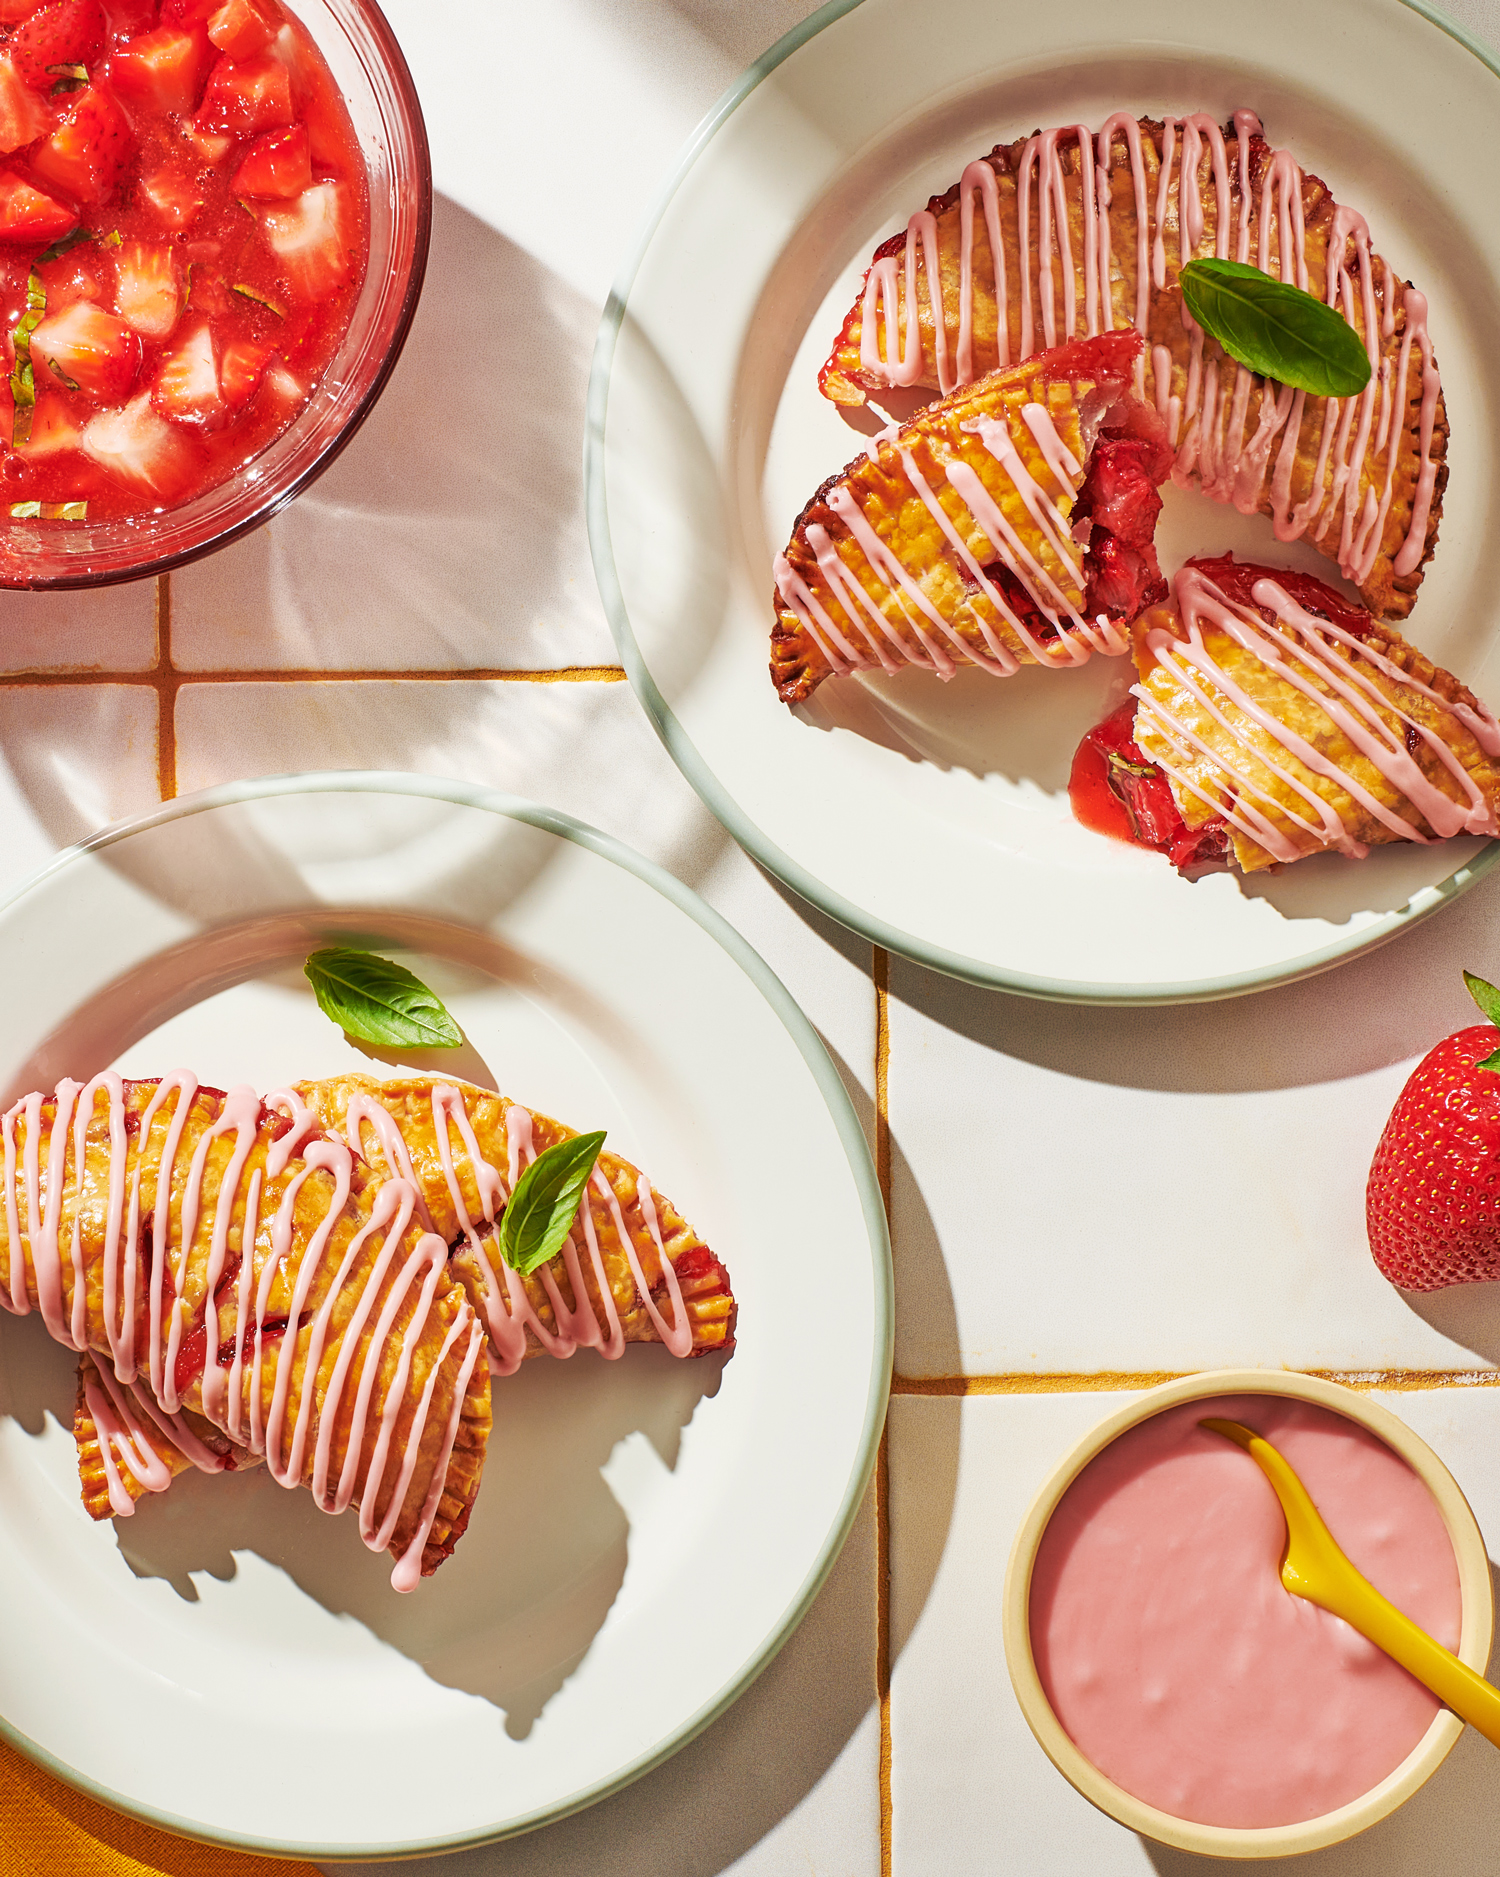 Image of Always Fresh strawberry basil hand pies on a plate with berry drizzle.